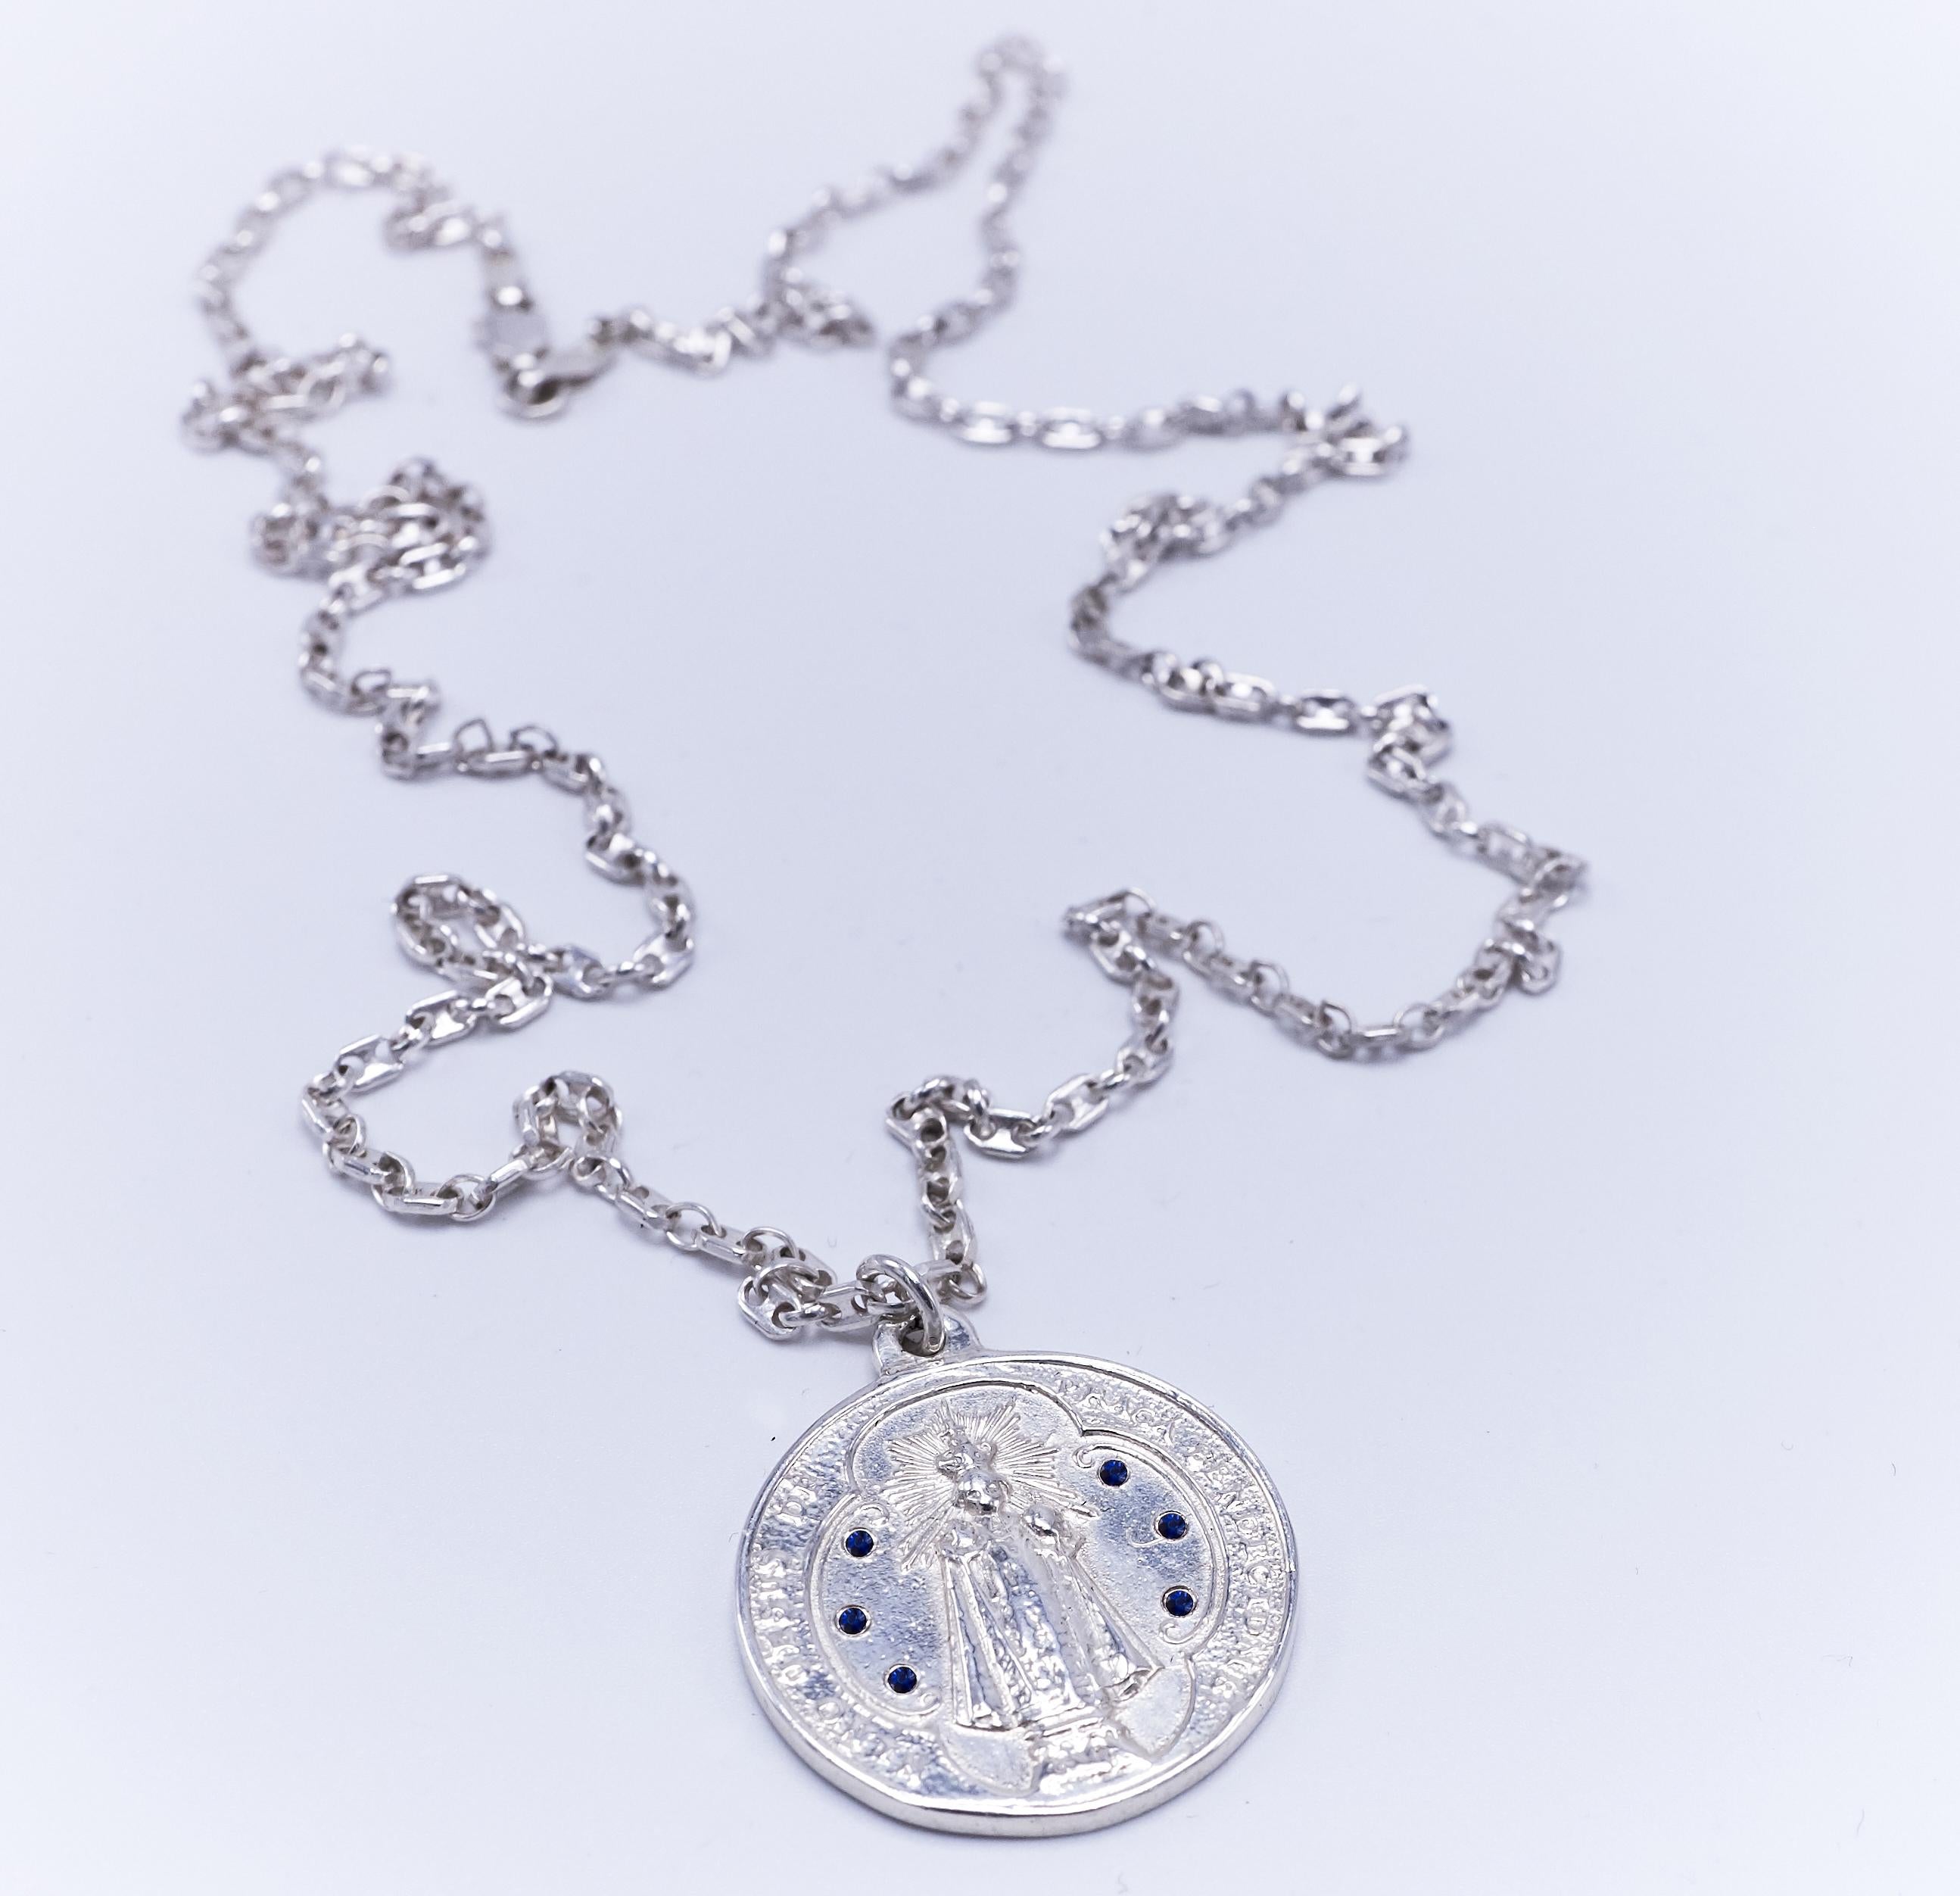 Medal Chain Necklace Miraculous Virgin Mary Blue Sapphire Silver J Dauphin

J DAUPHIN necklace 